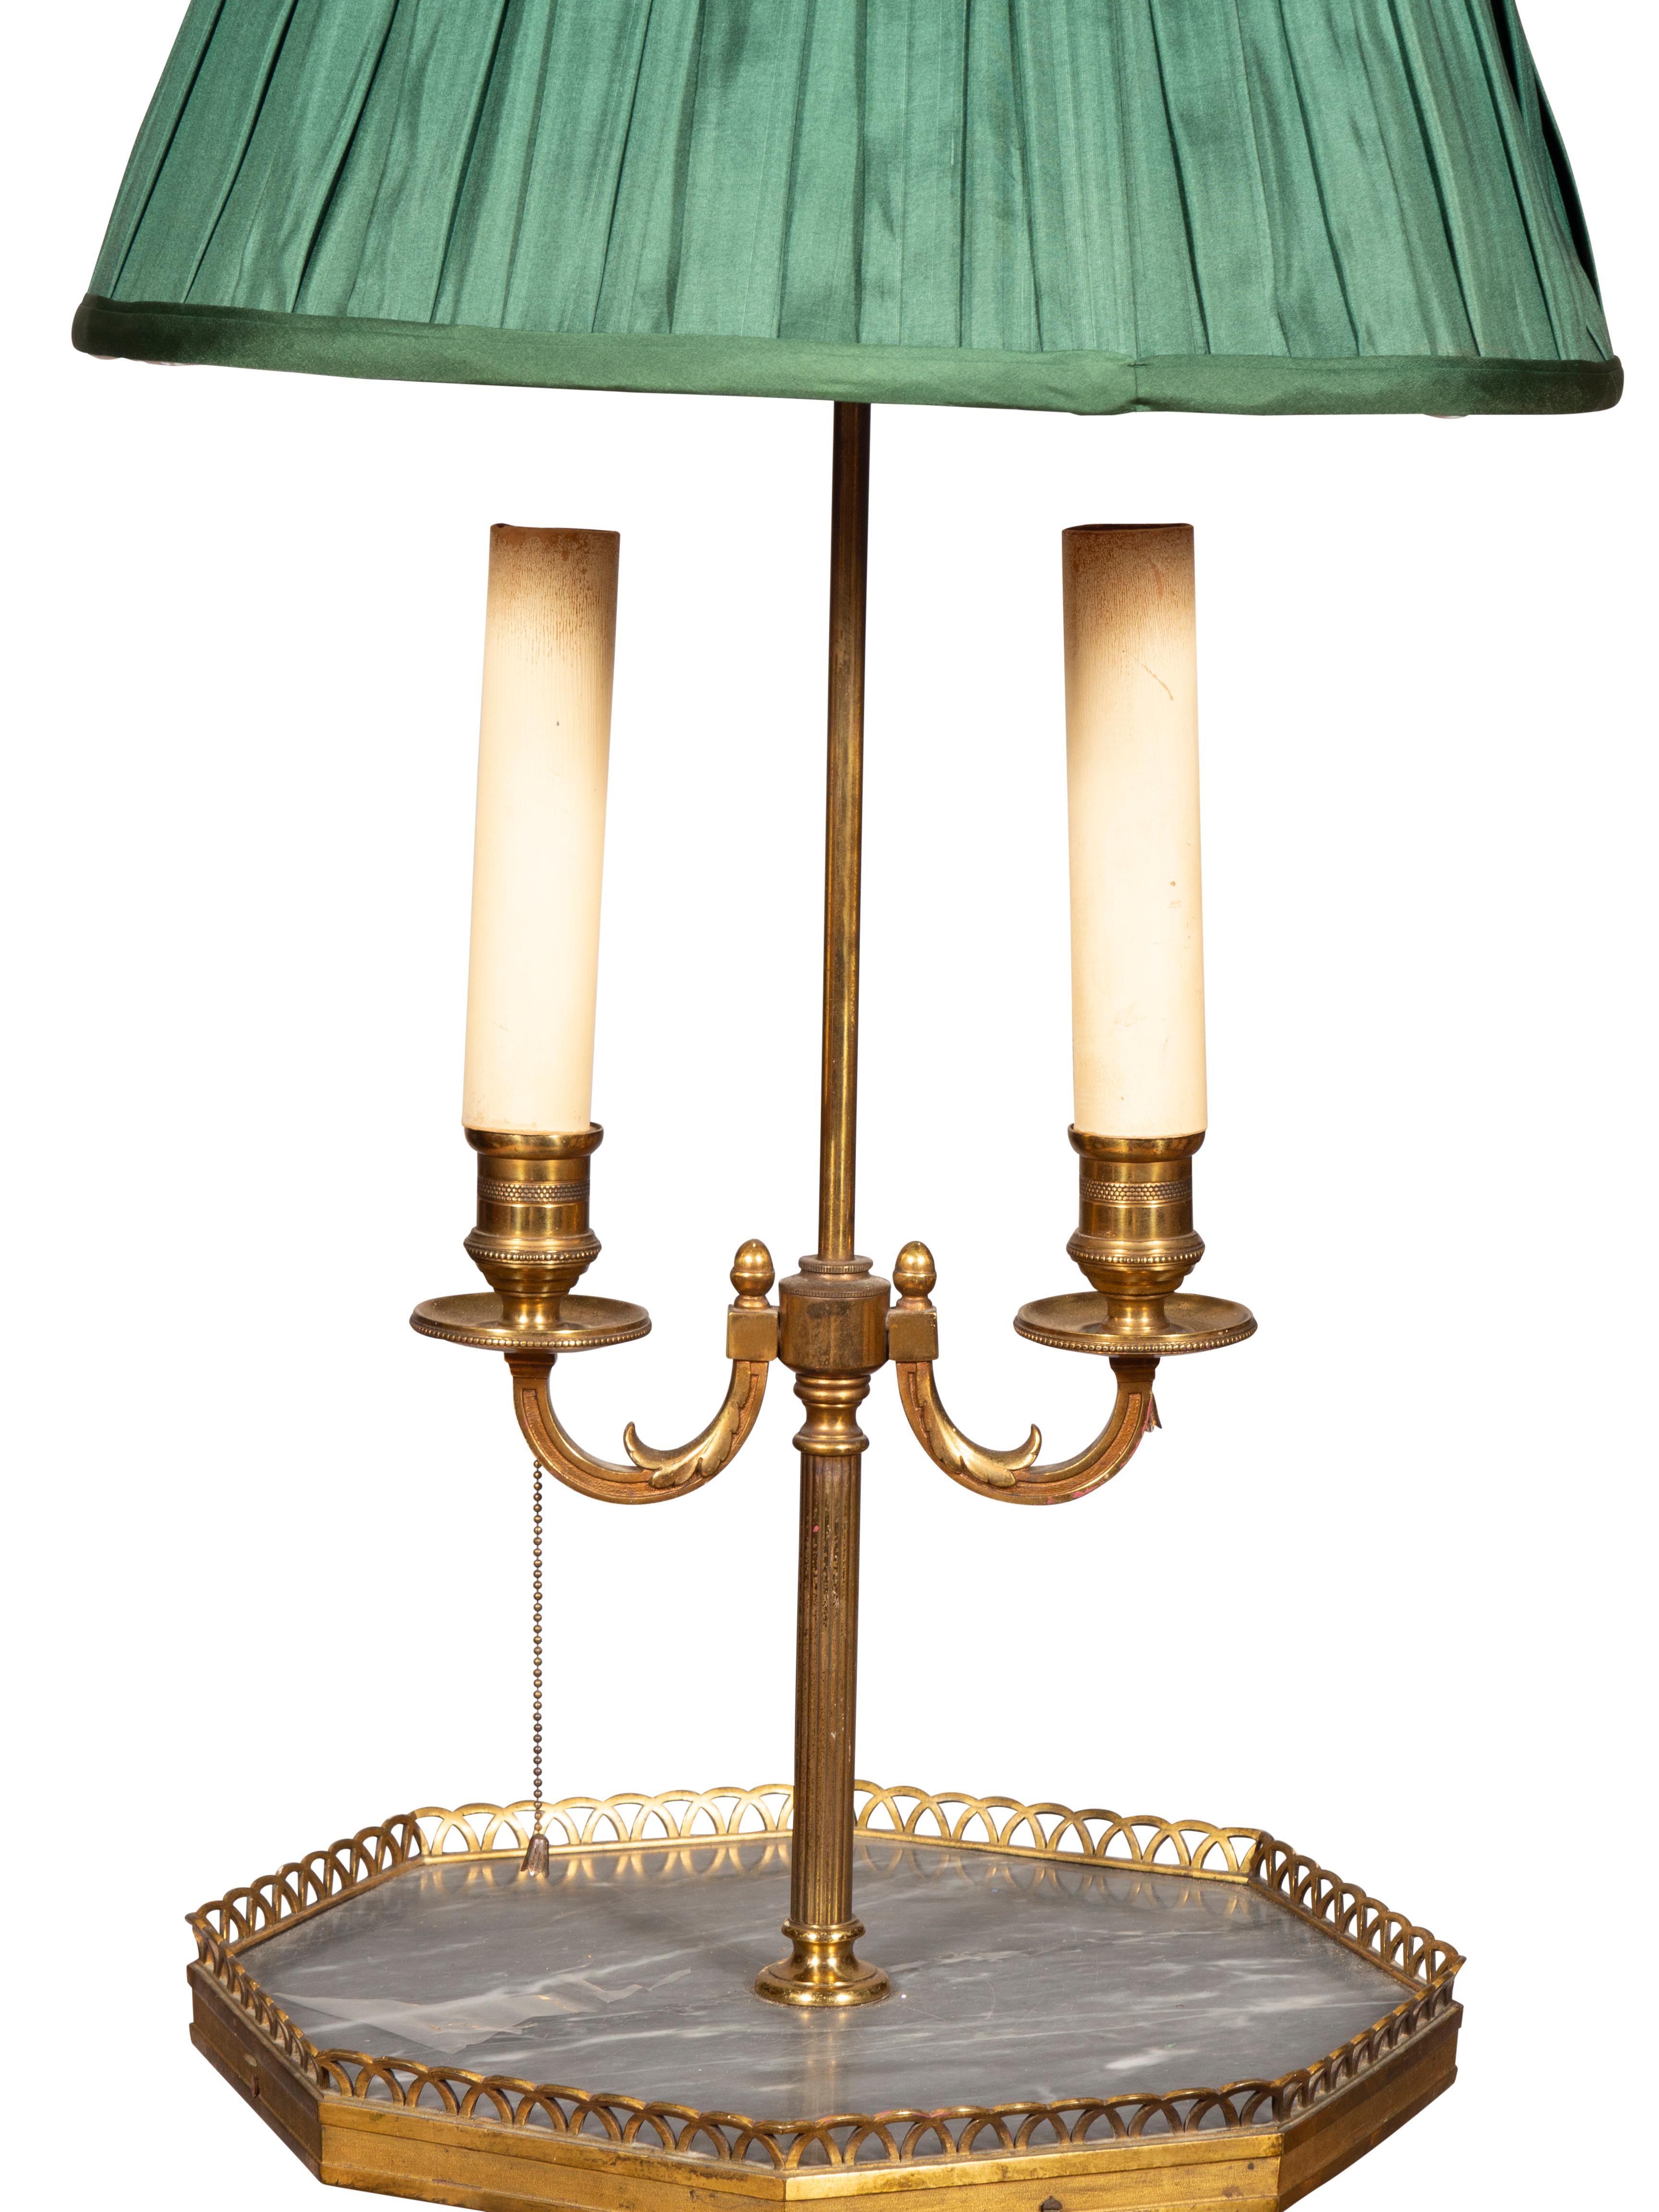 With green pleated shade. Two socket and grey marble octagonal shelf with brass gallery. Raised on three splayed legs.